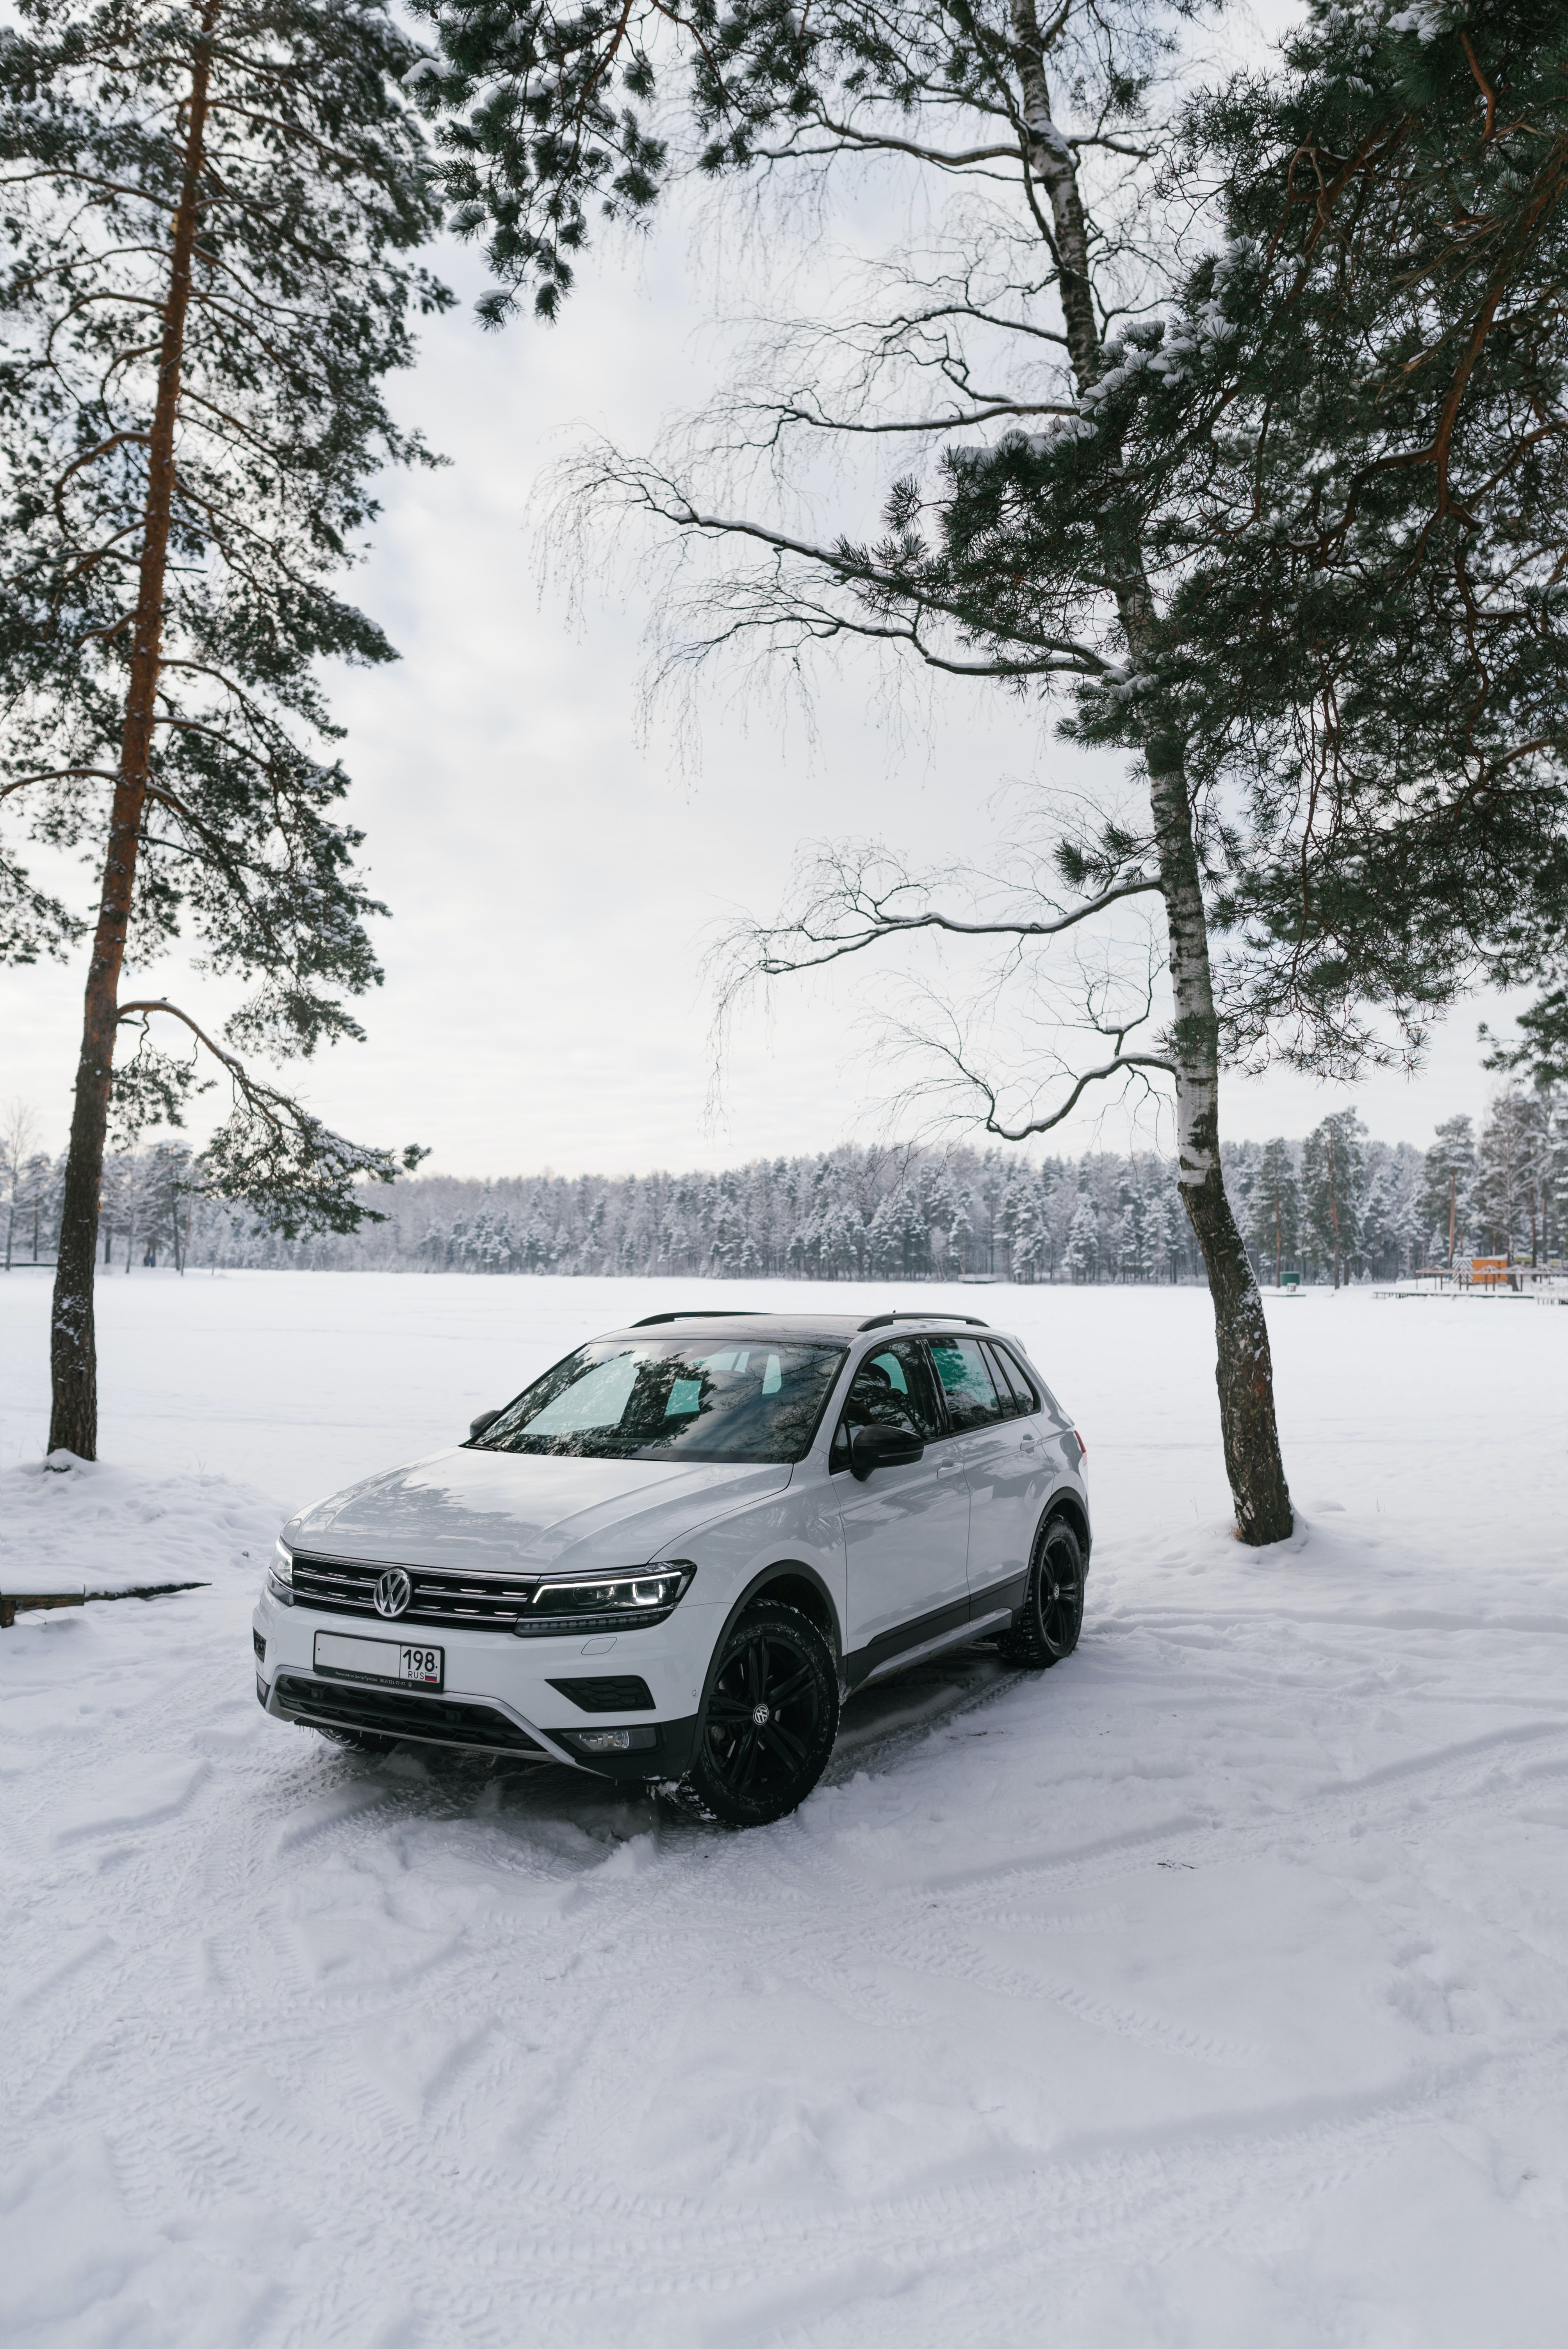 145109 download wallpaper volkswagen, snow, cars, white, car, side view, volkswagen tiguan screensavers and pictures for free